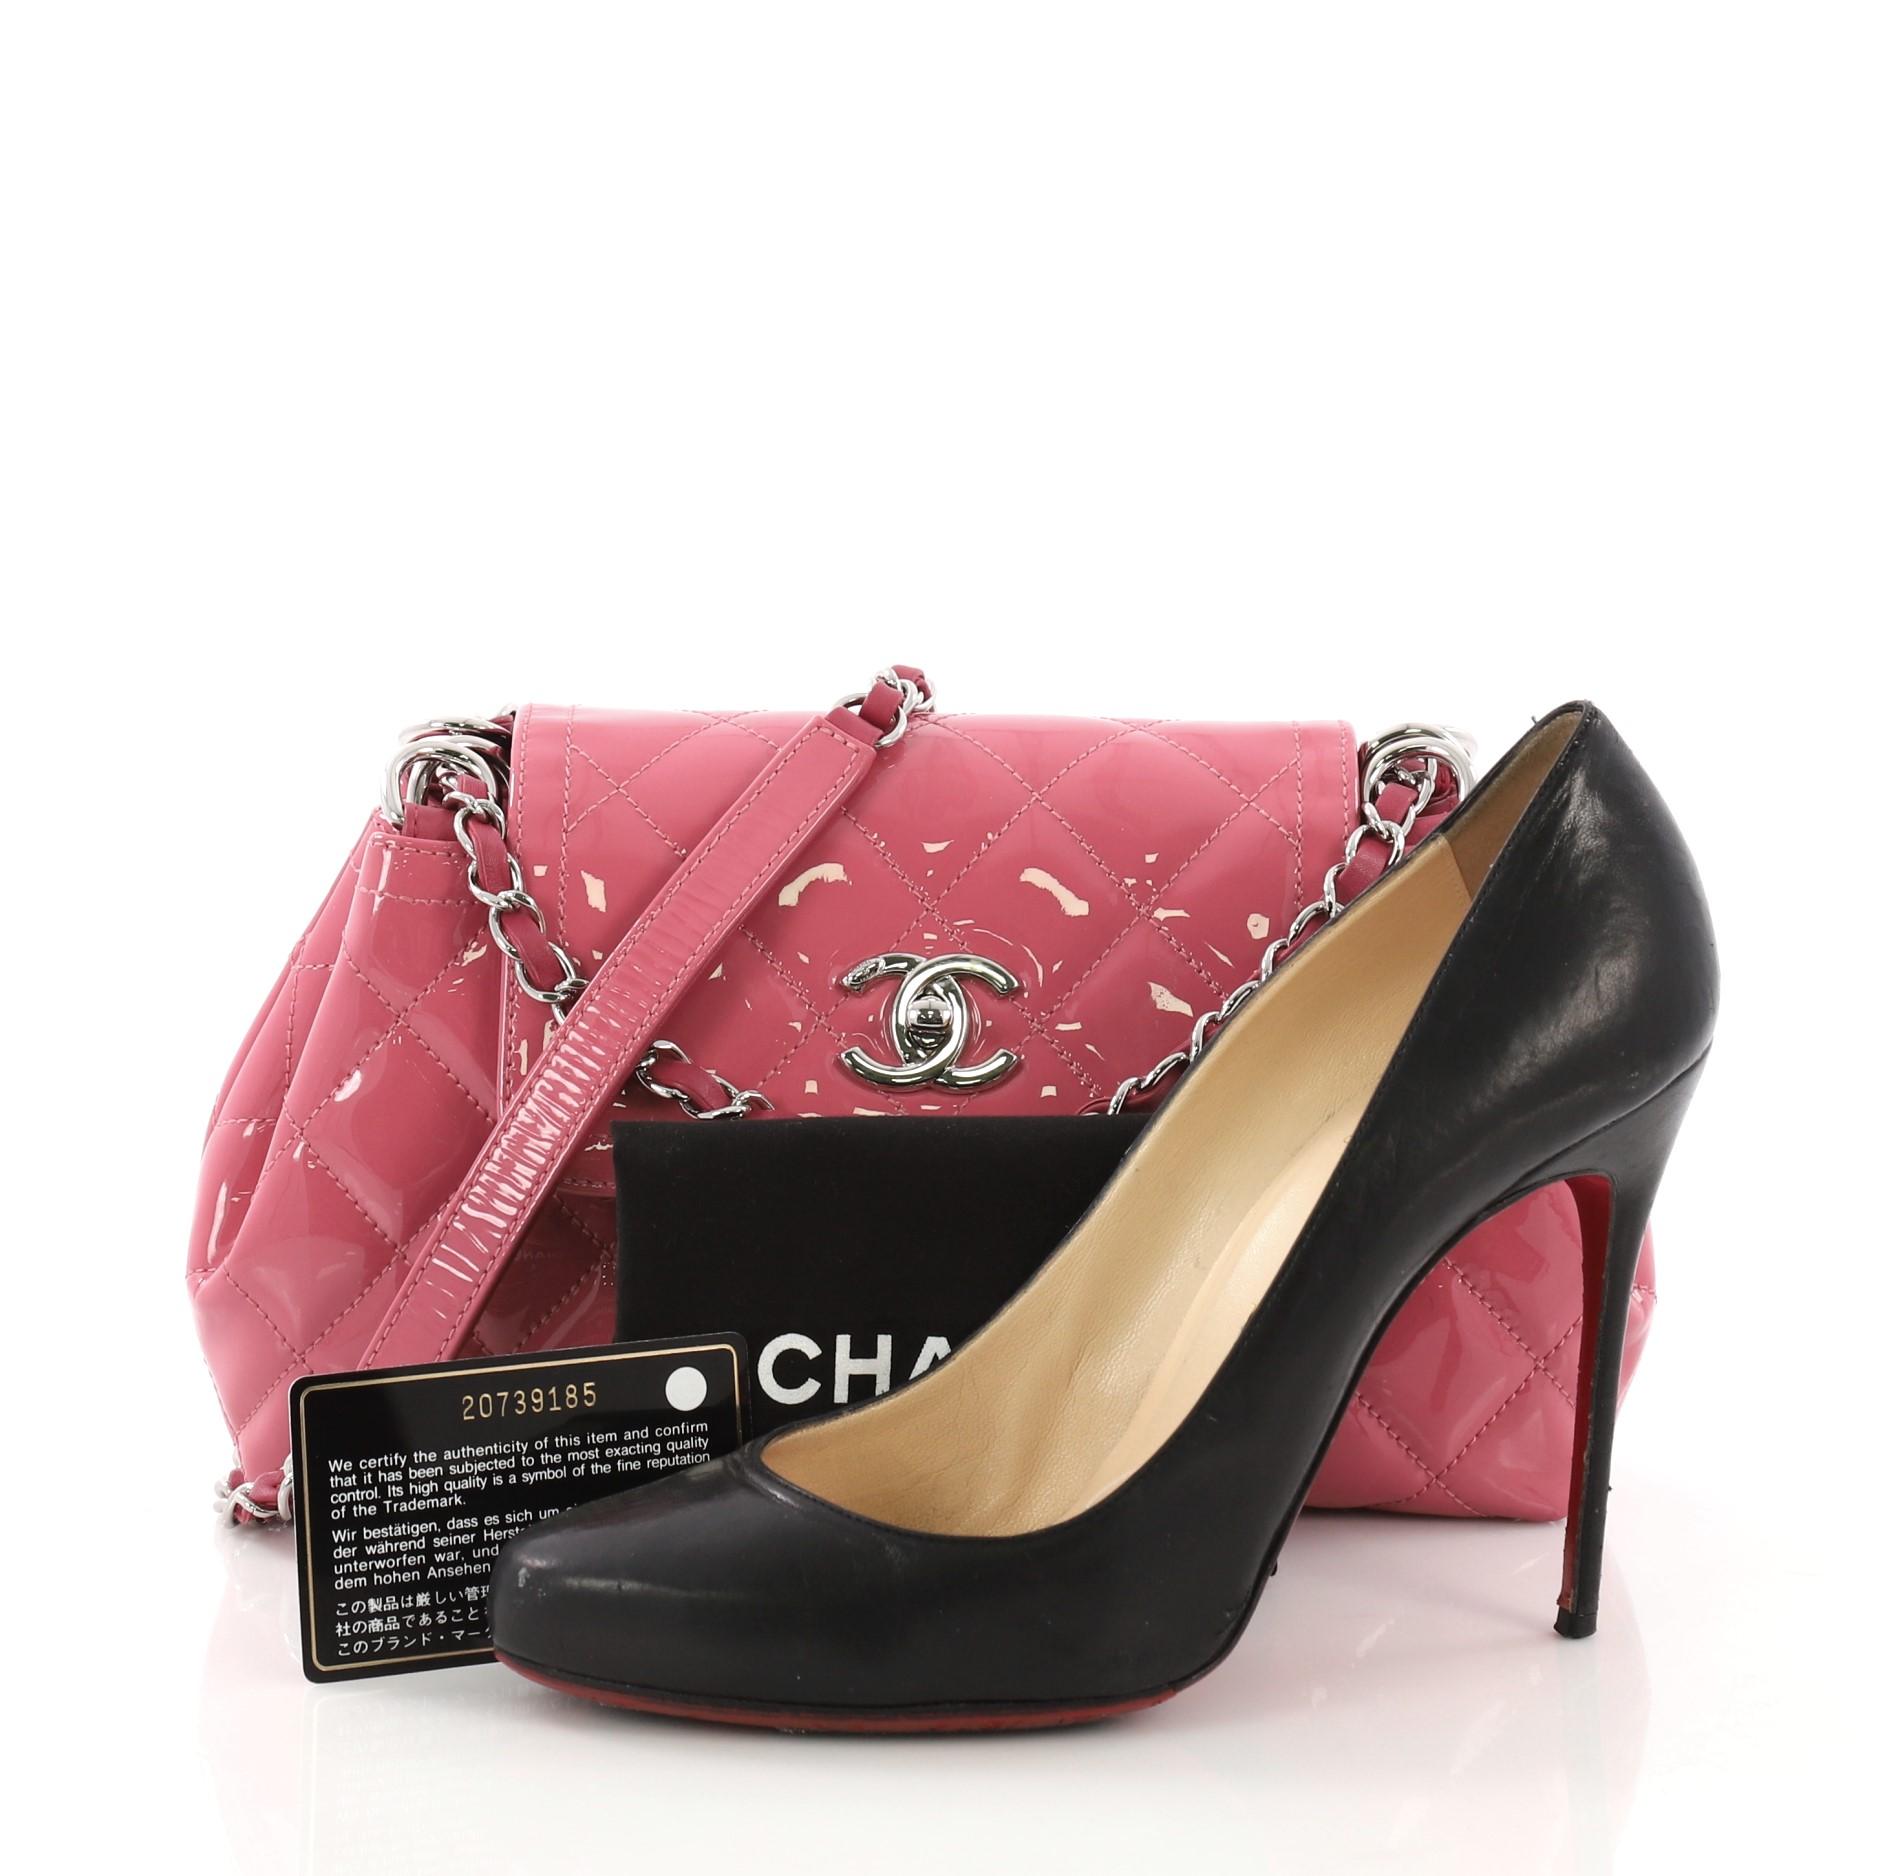 This Chanel Coco Shine Accordion Flap Bag Quilted Patent Small, crafted from pink quilted patent leather, features chain link leather strap threaded through eyelets, frontal flap with signature CC turn-lock closure, and silver-tone hardware. Its